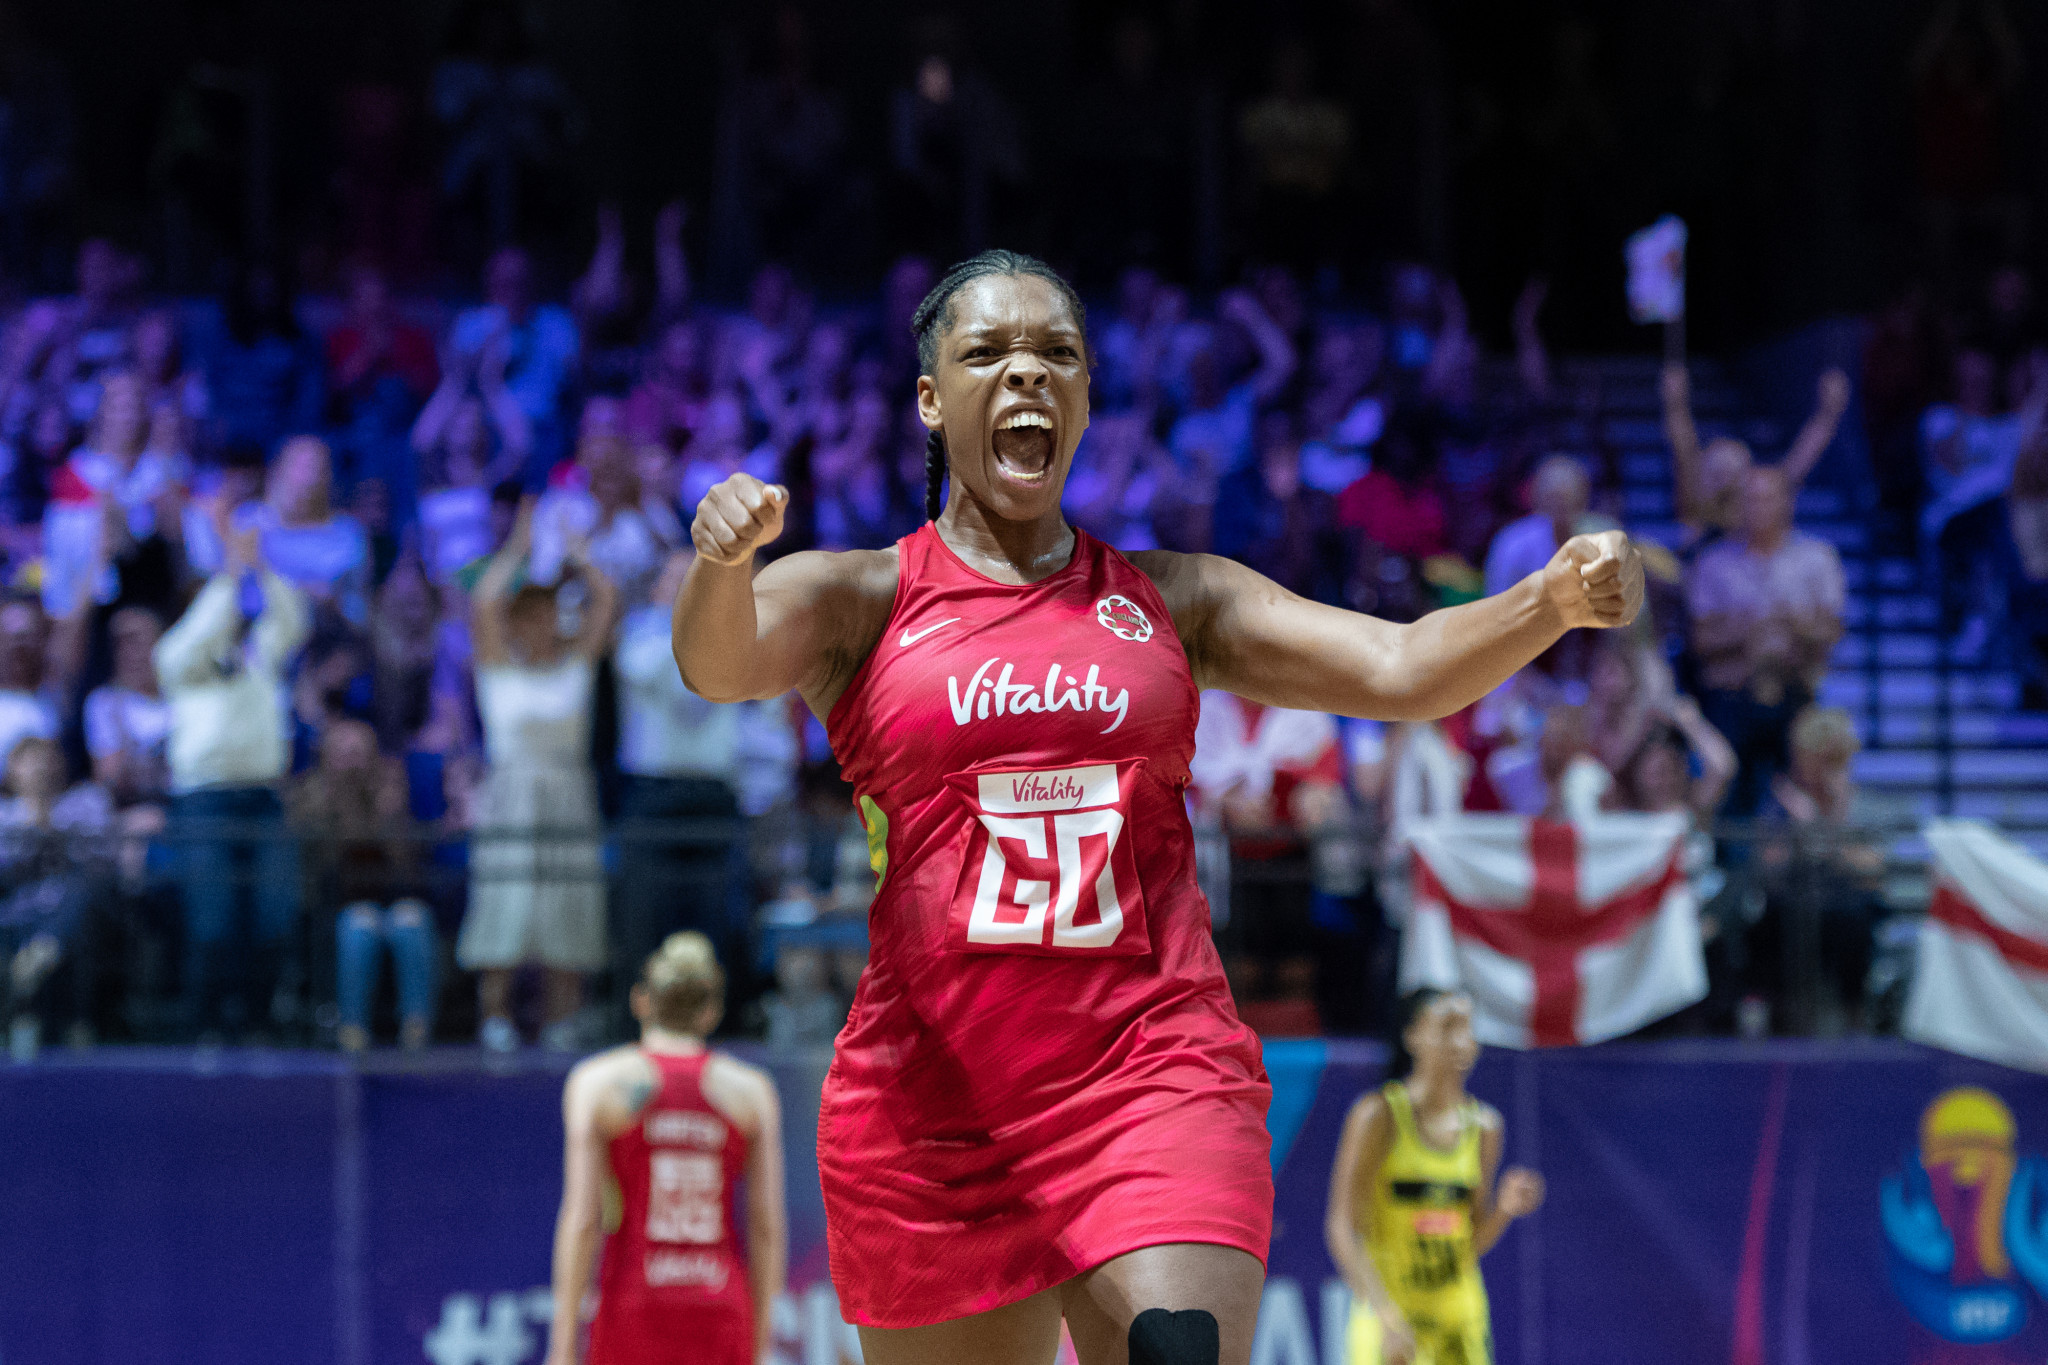 Netball player Eboni Usoro-Brown claimed the Birmingham 2022 Commonwealth Games would help revive women's sport after the pandemic ©Getty Images